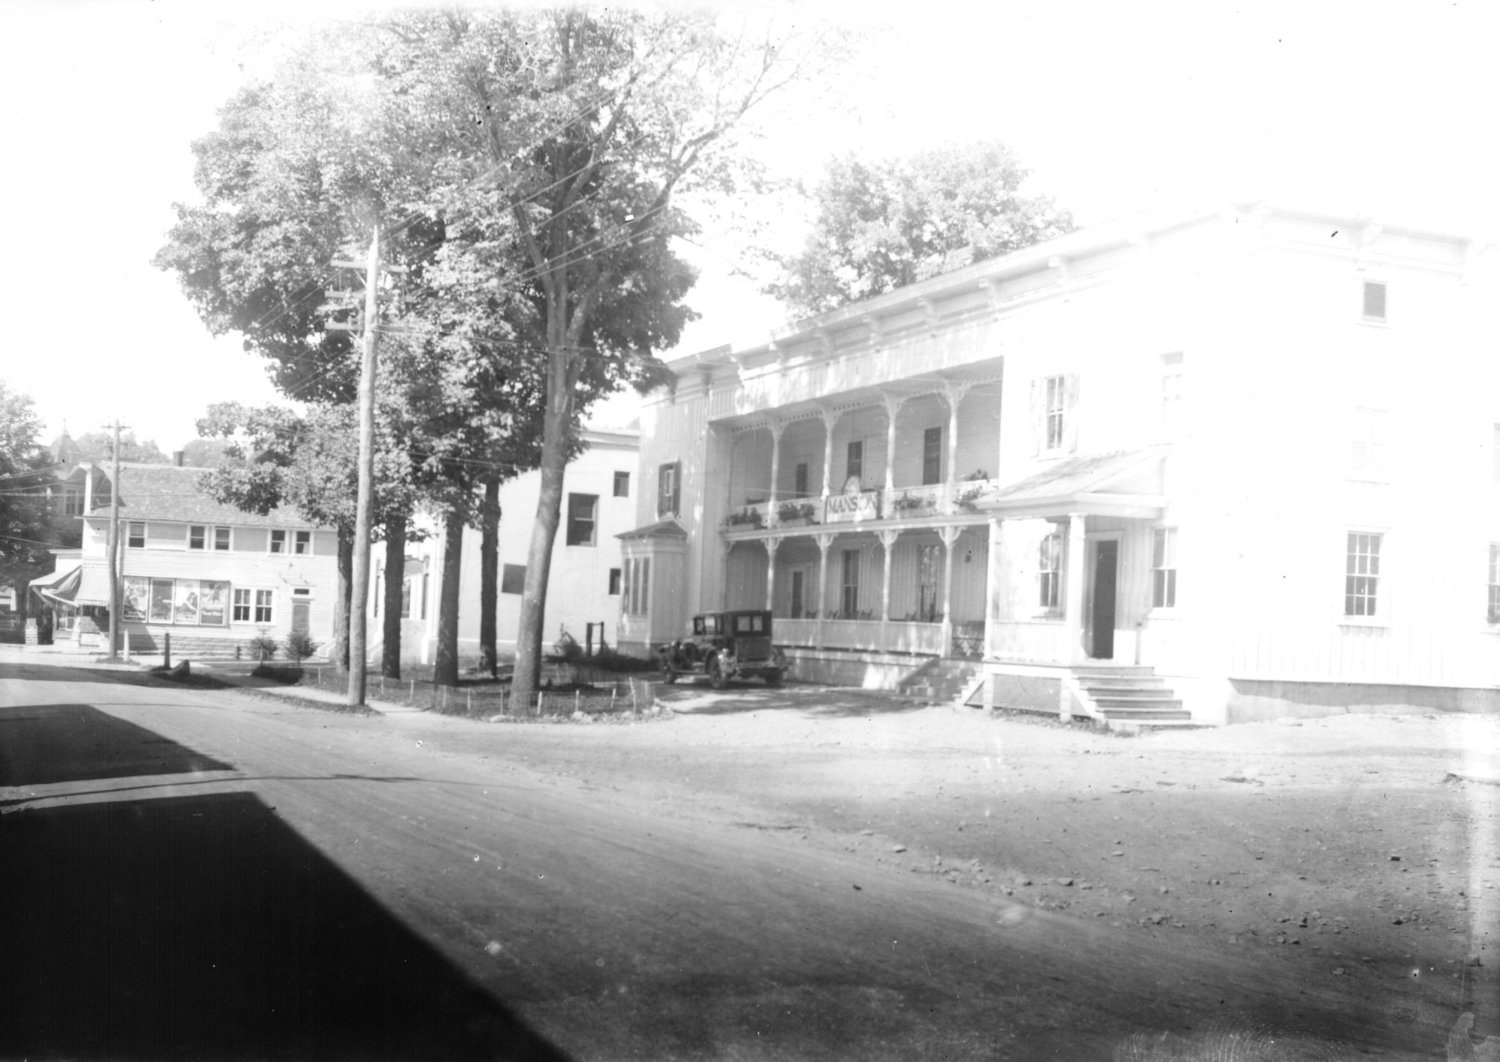 A century ago: 

Instead of Throwback Thursday, this is A Century Ago Tuesday ... it’s nearly 110 years, by our reckoning. The photo above is undated, yet it shows the Mansion House in Jeffersonville during the time it must have housed the post office, which we mentioned a couple of weeks ago had moved in 1912 from the corner of Maple Avenue. The photographer is unknown, but the photos are among a number of western Sullivan County images which have been circulating online in recent years which we would give proper attribution if we could.